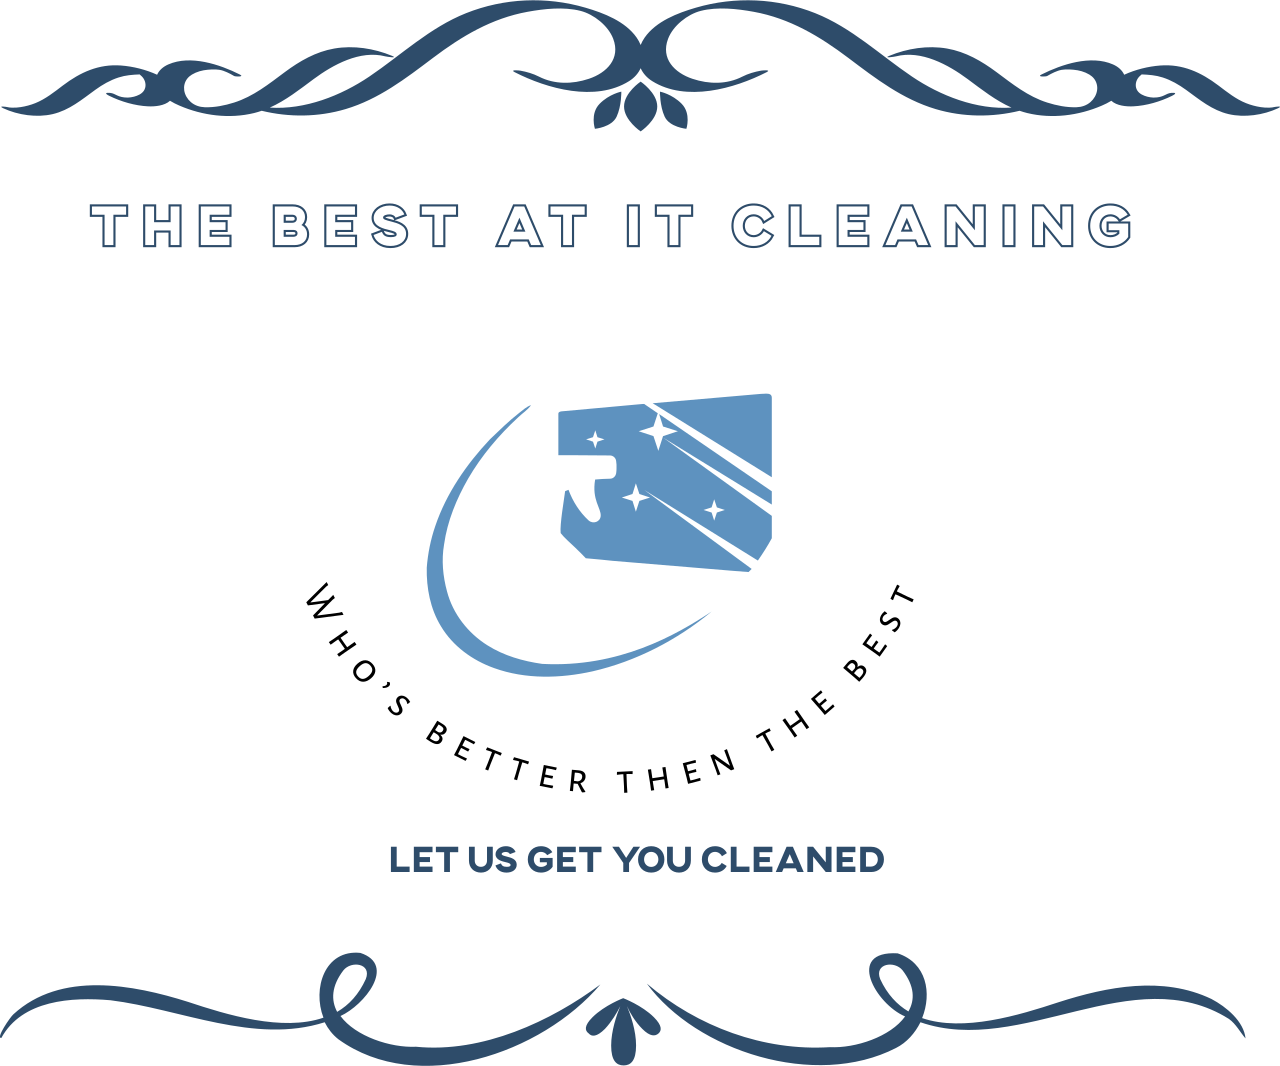 THE BEST AT IT CLEANING 's web page